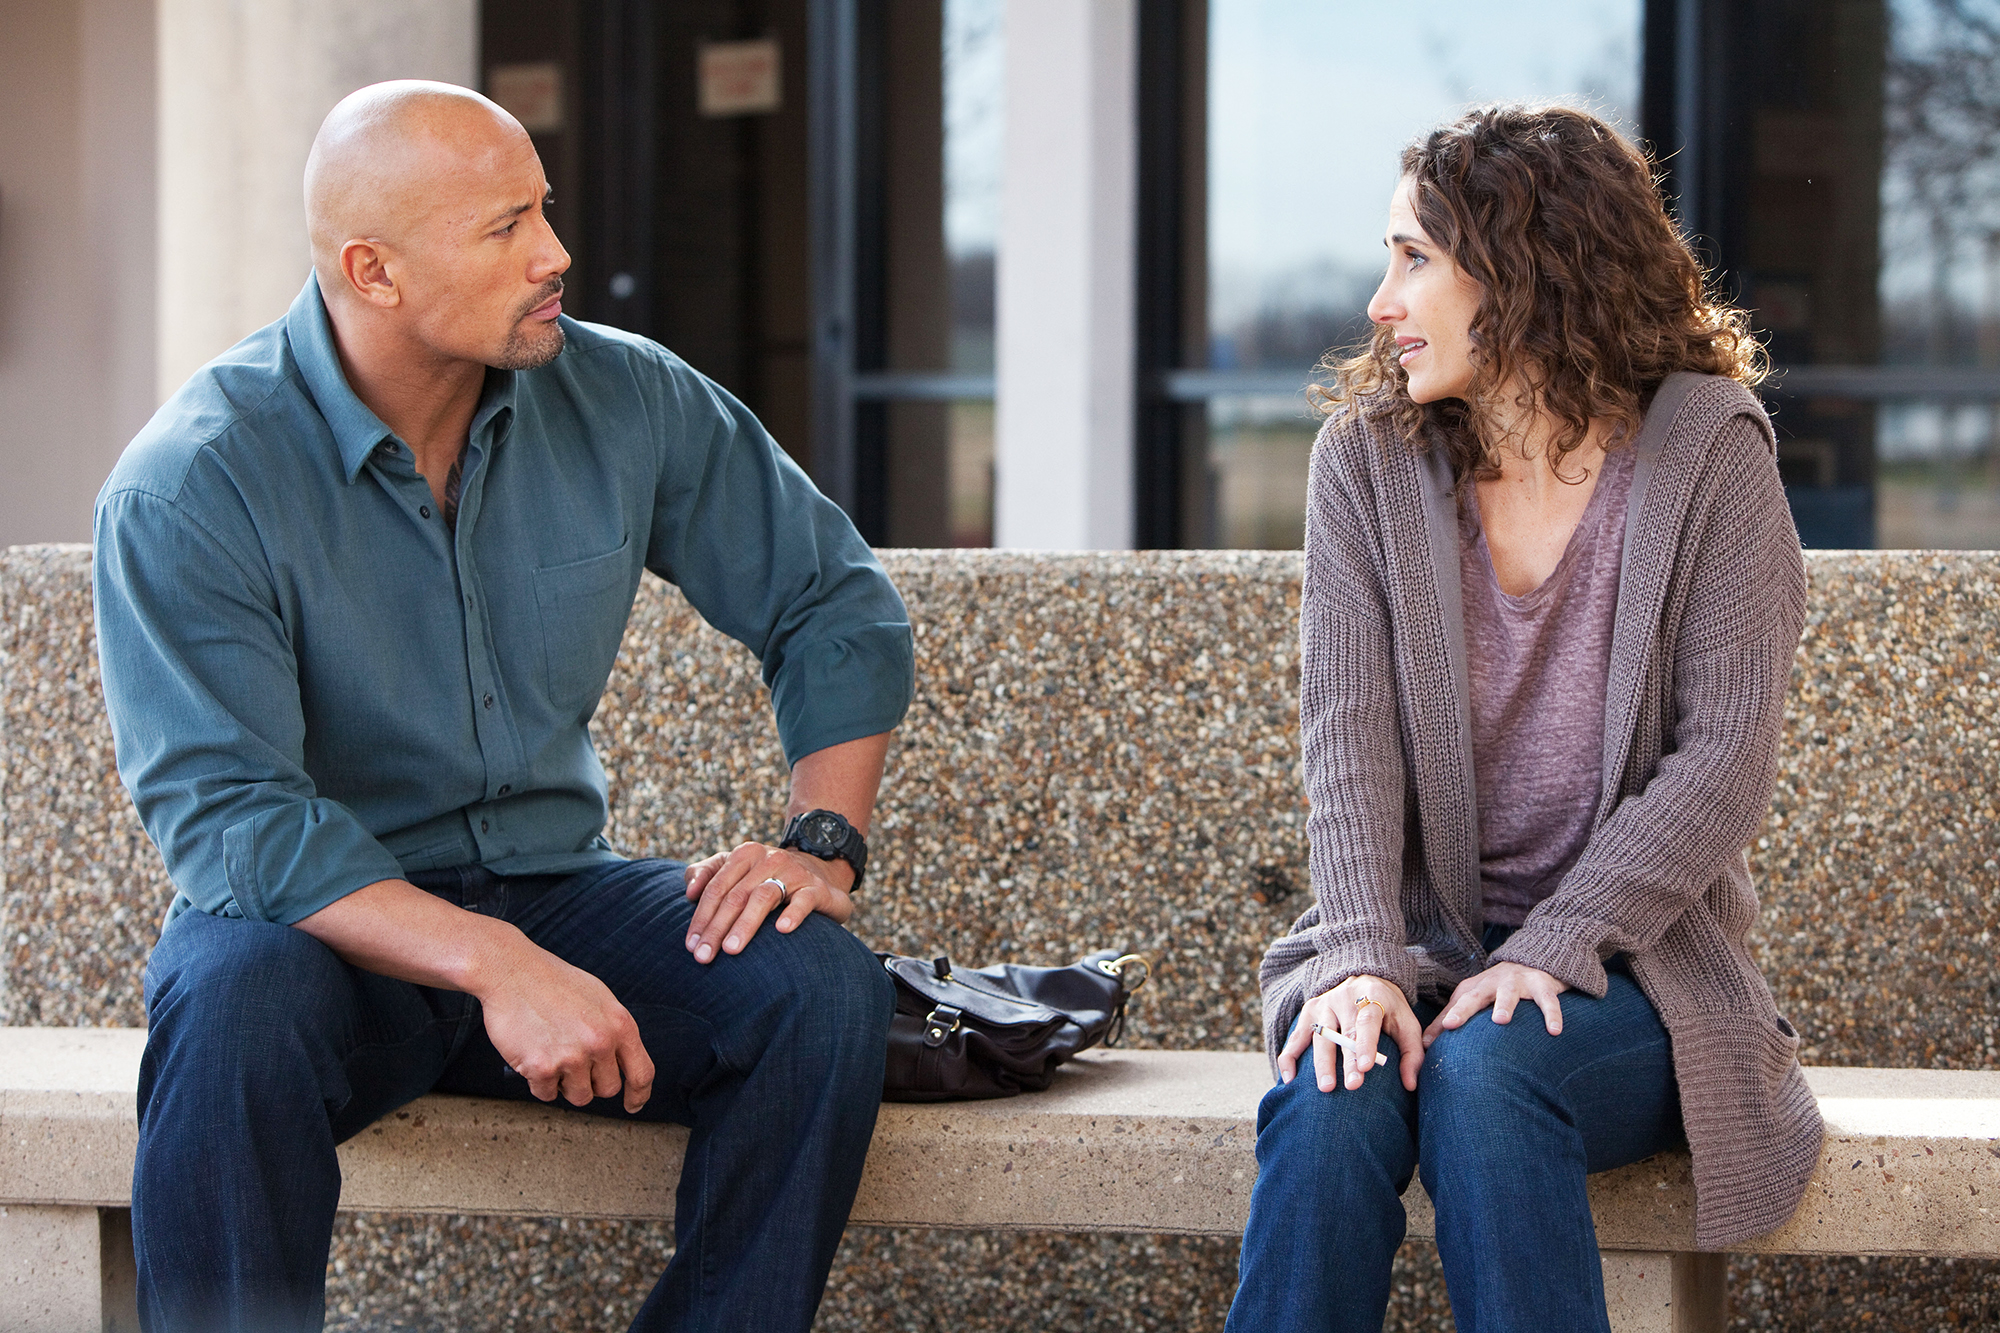 Dwayne Johnson, as John Matthews, and Melina Kanakaredes, as Sylvie Collins, in Snitch in 2013.